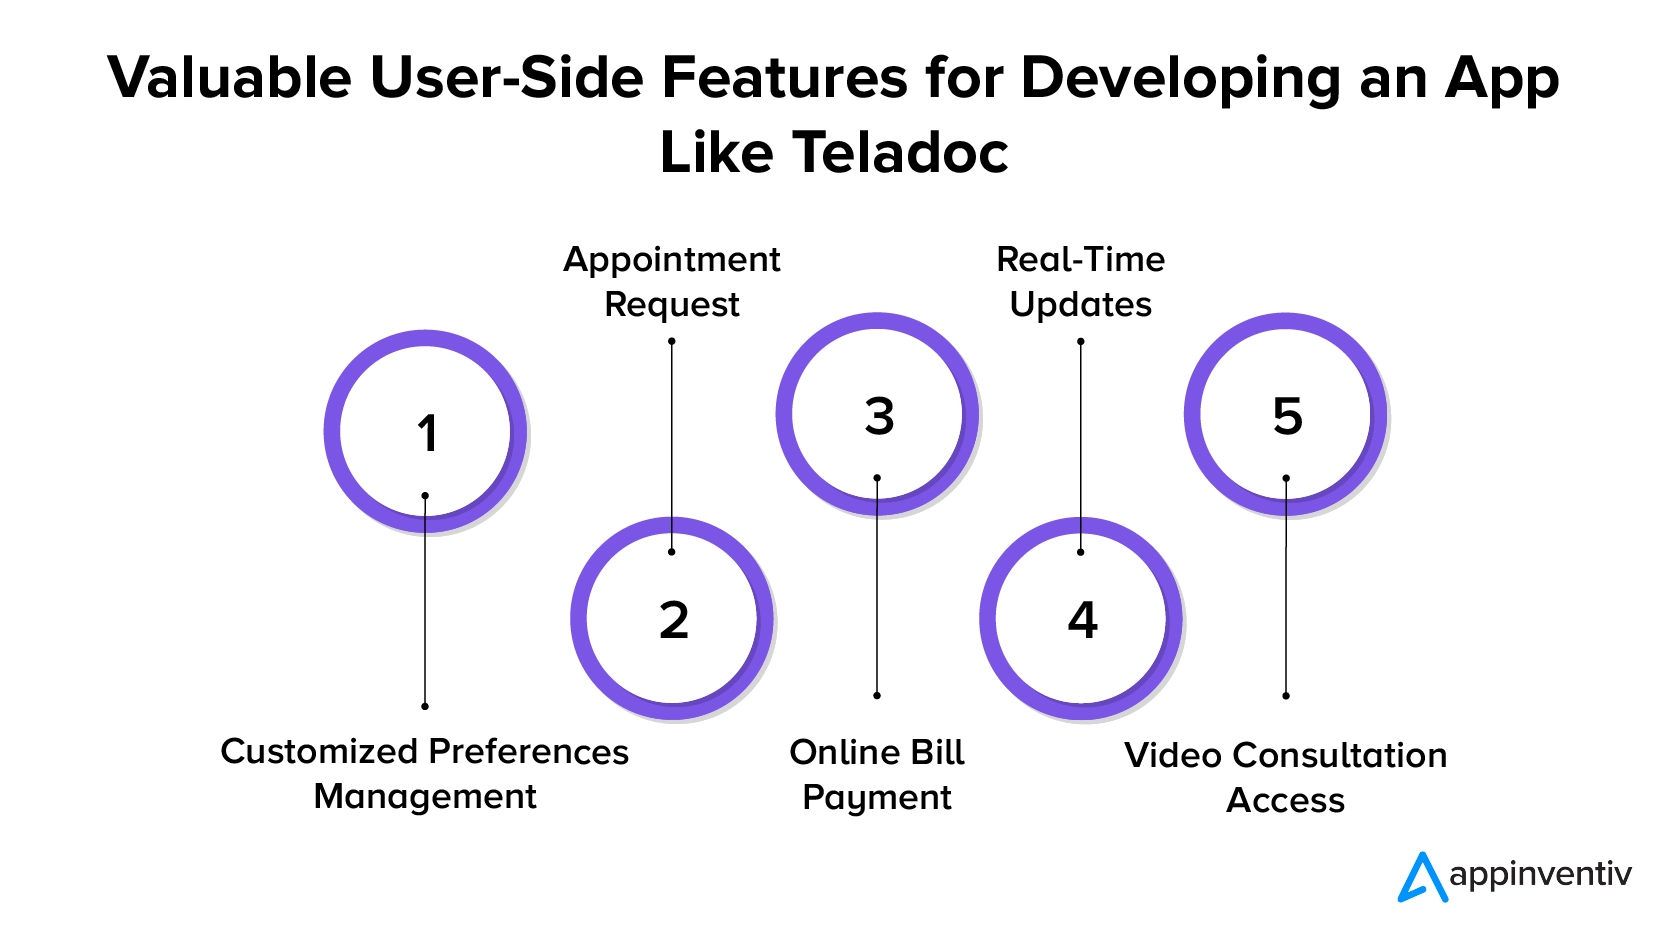 Essential User-Side Features for Developing an App Like Teladoc